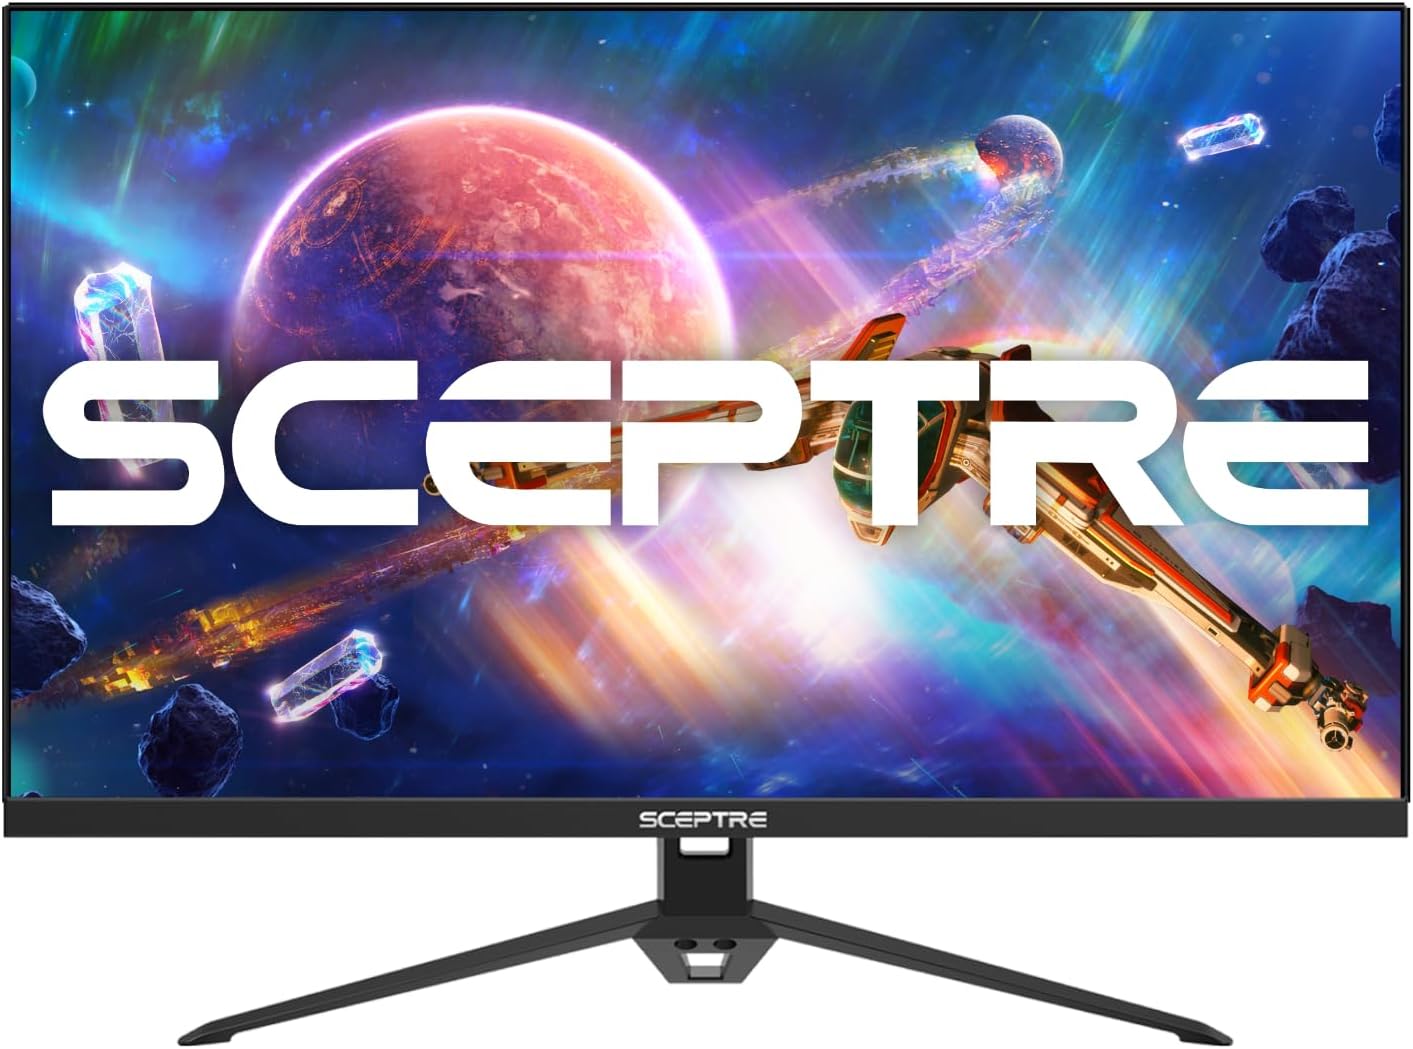 budget 144hz monitor detailed review